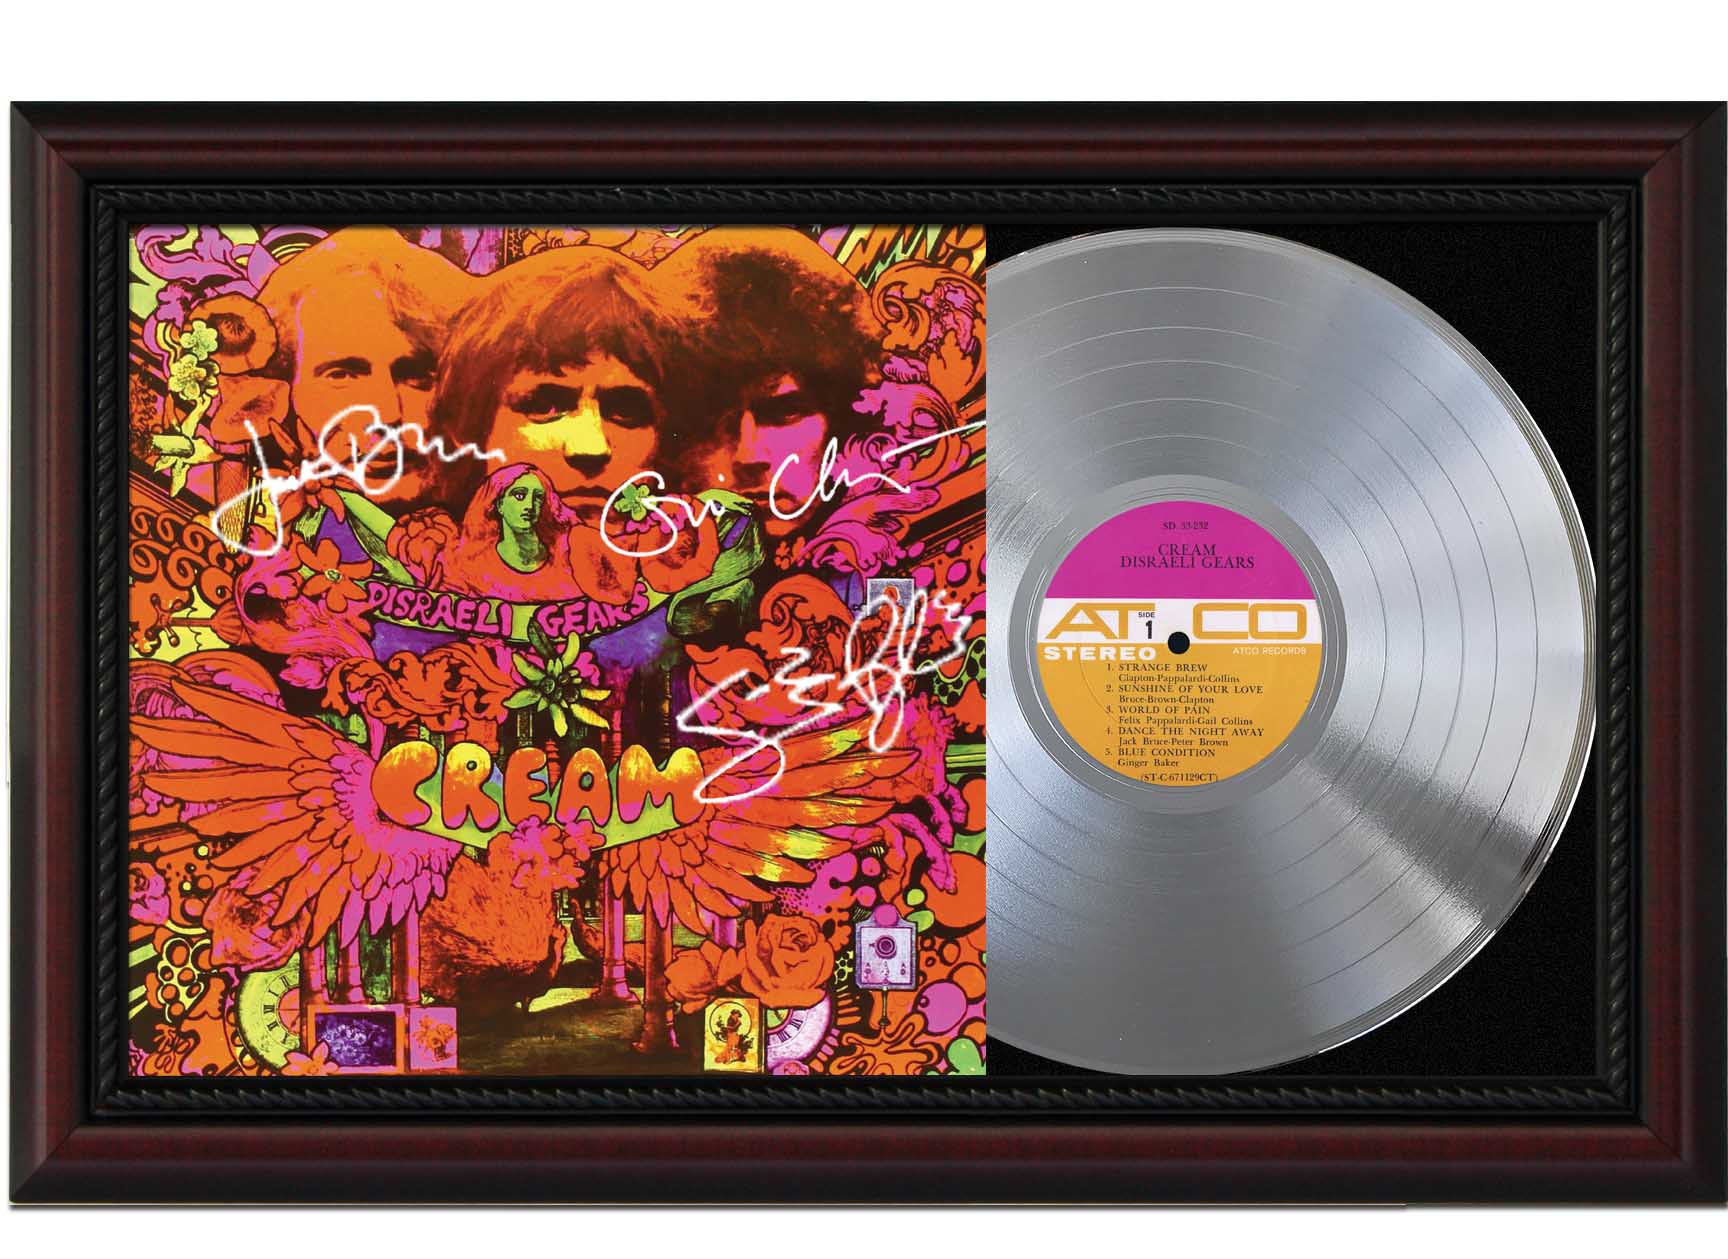 Cream Disraeli Gears Cherrywood Framed Signature Display M4 - Record Outlet Album and Disc Collectible Memorabilia